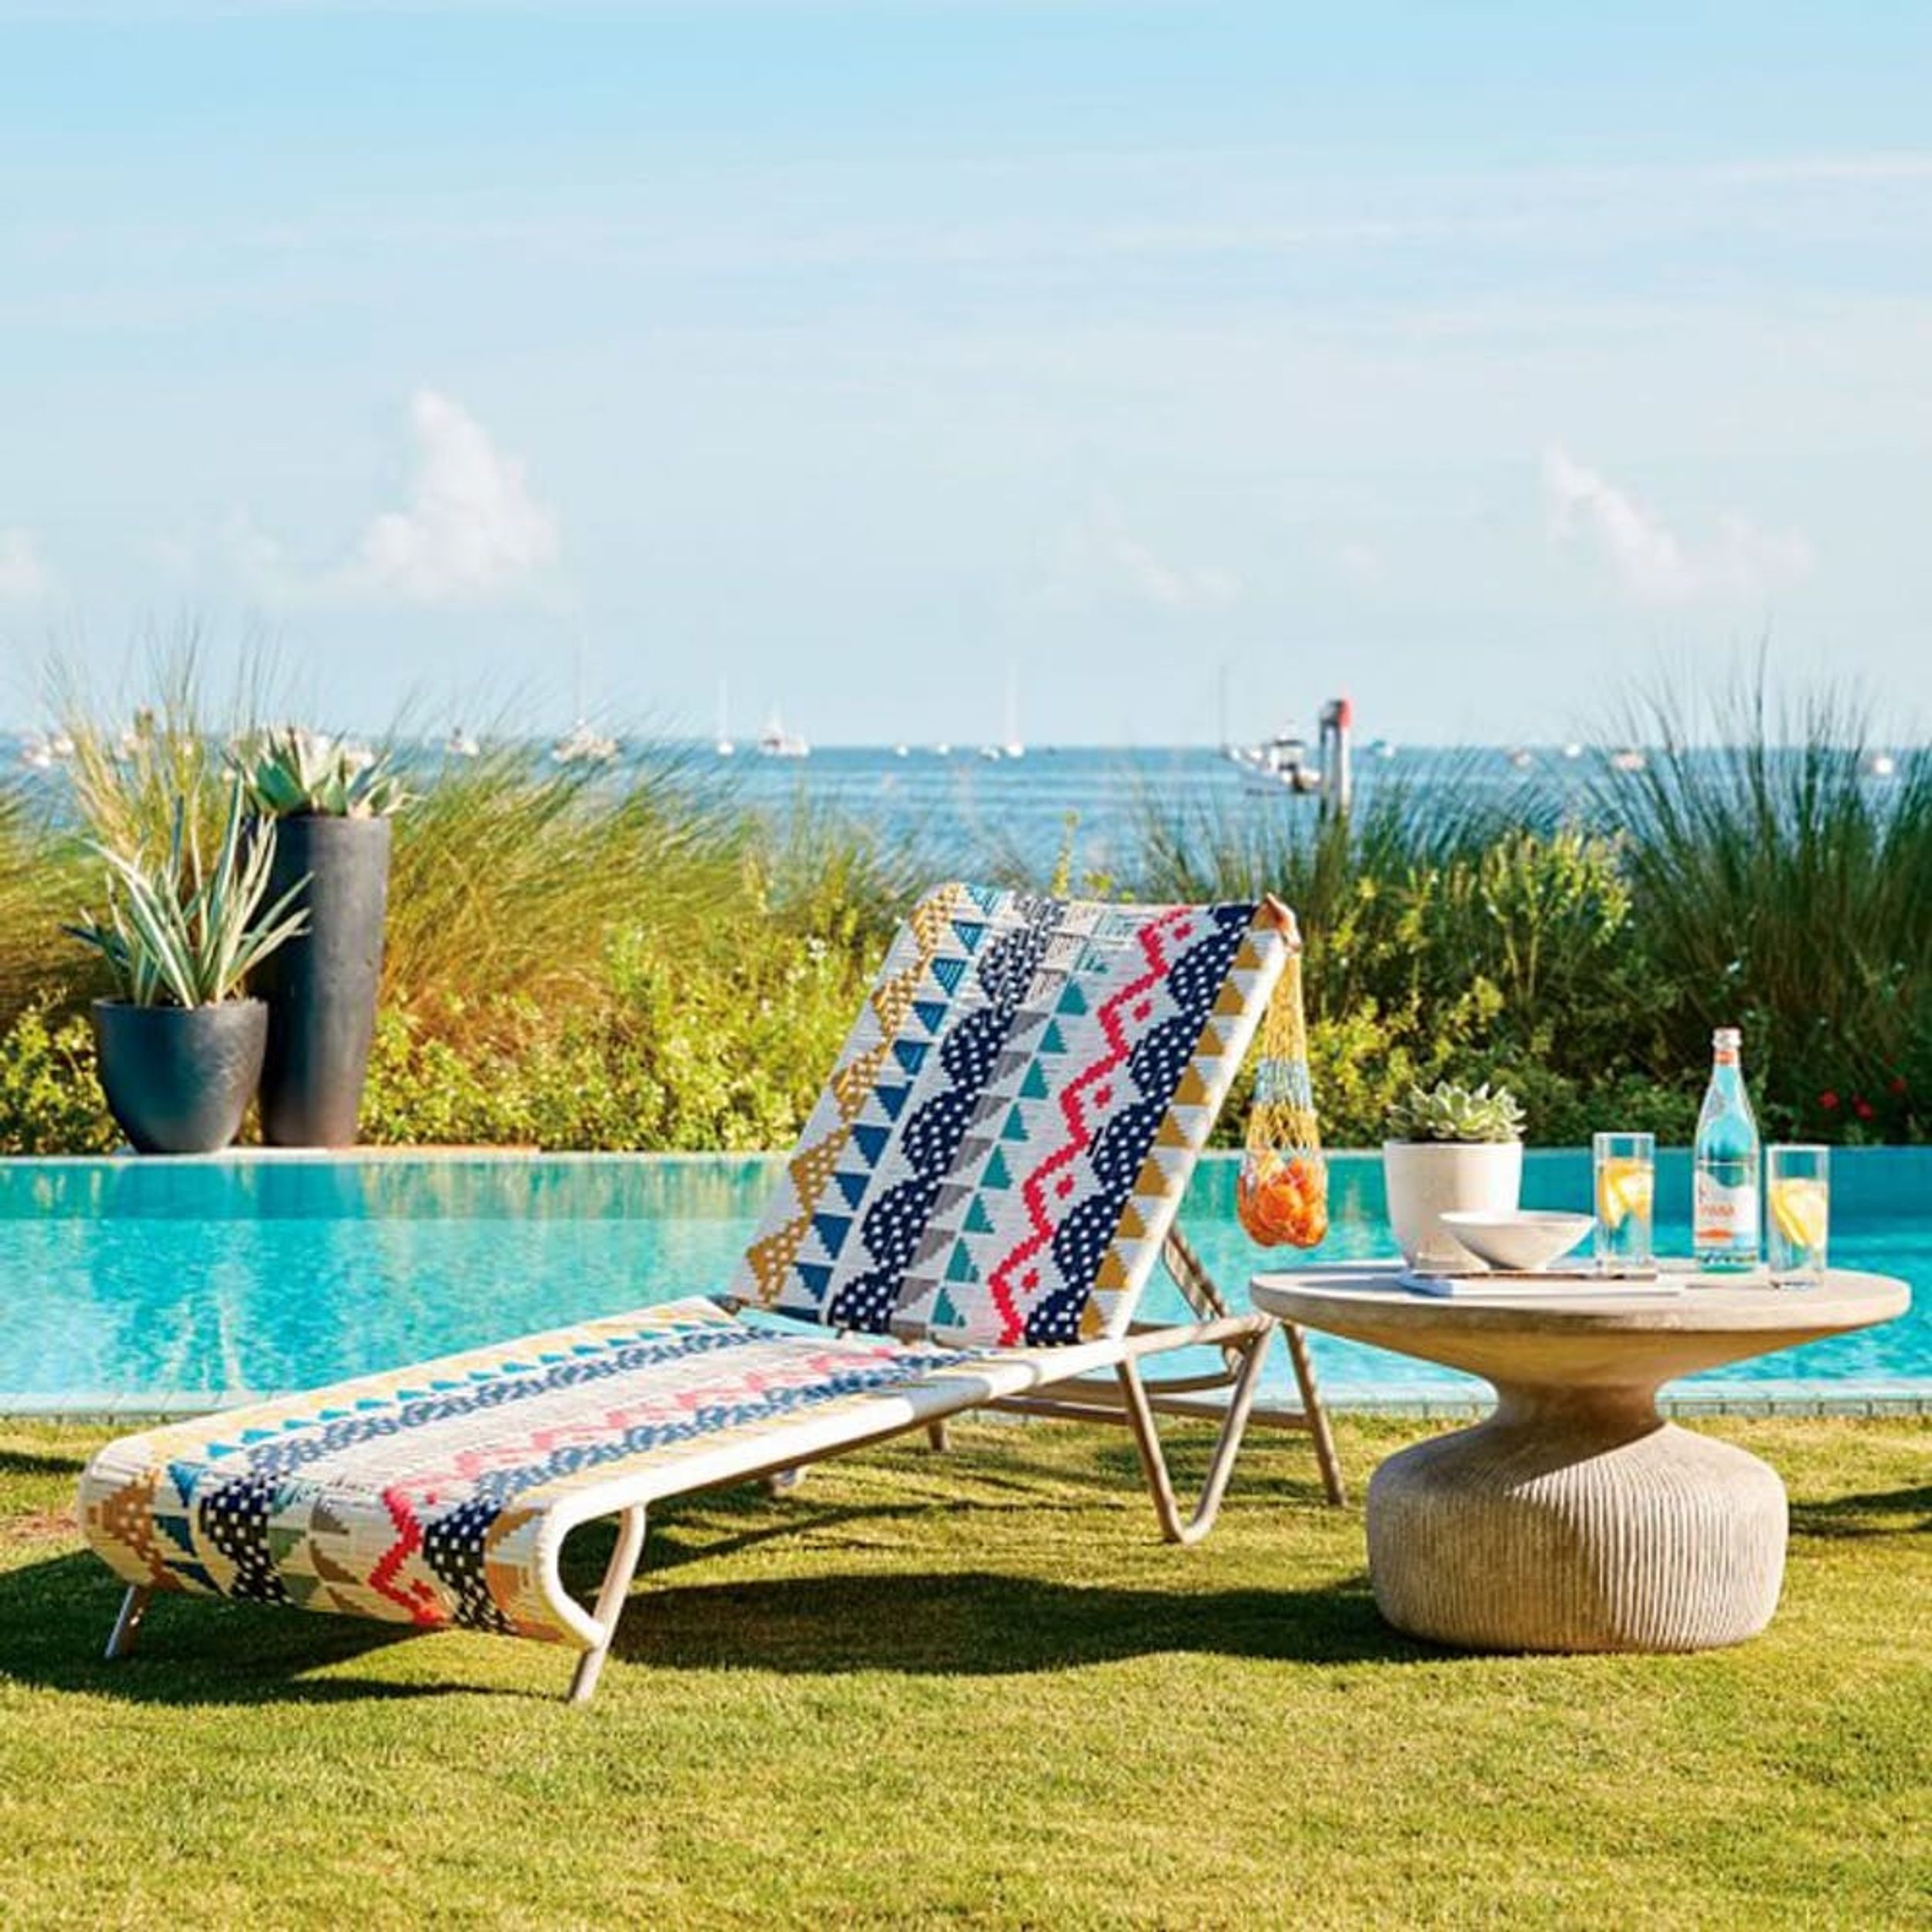 15 Ways to Make Your Patio the Only Place You’ll Want to Be This Summer